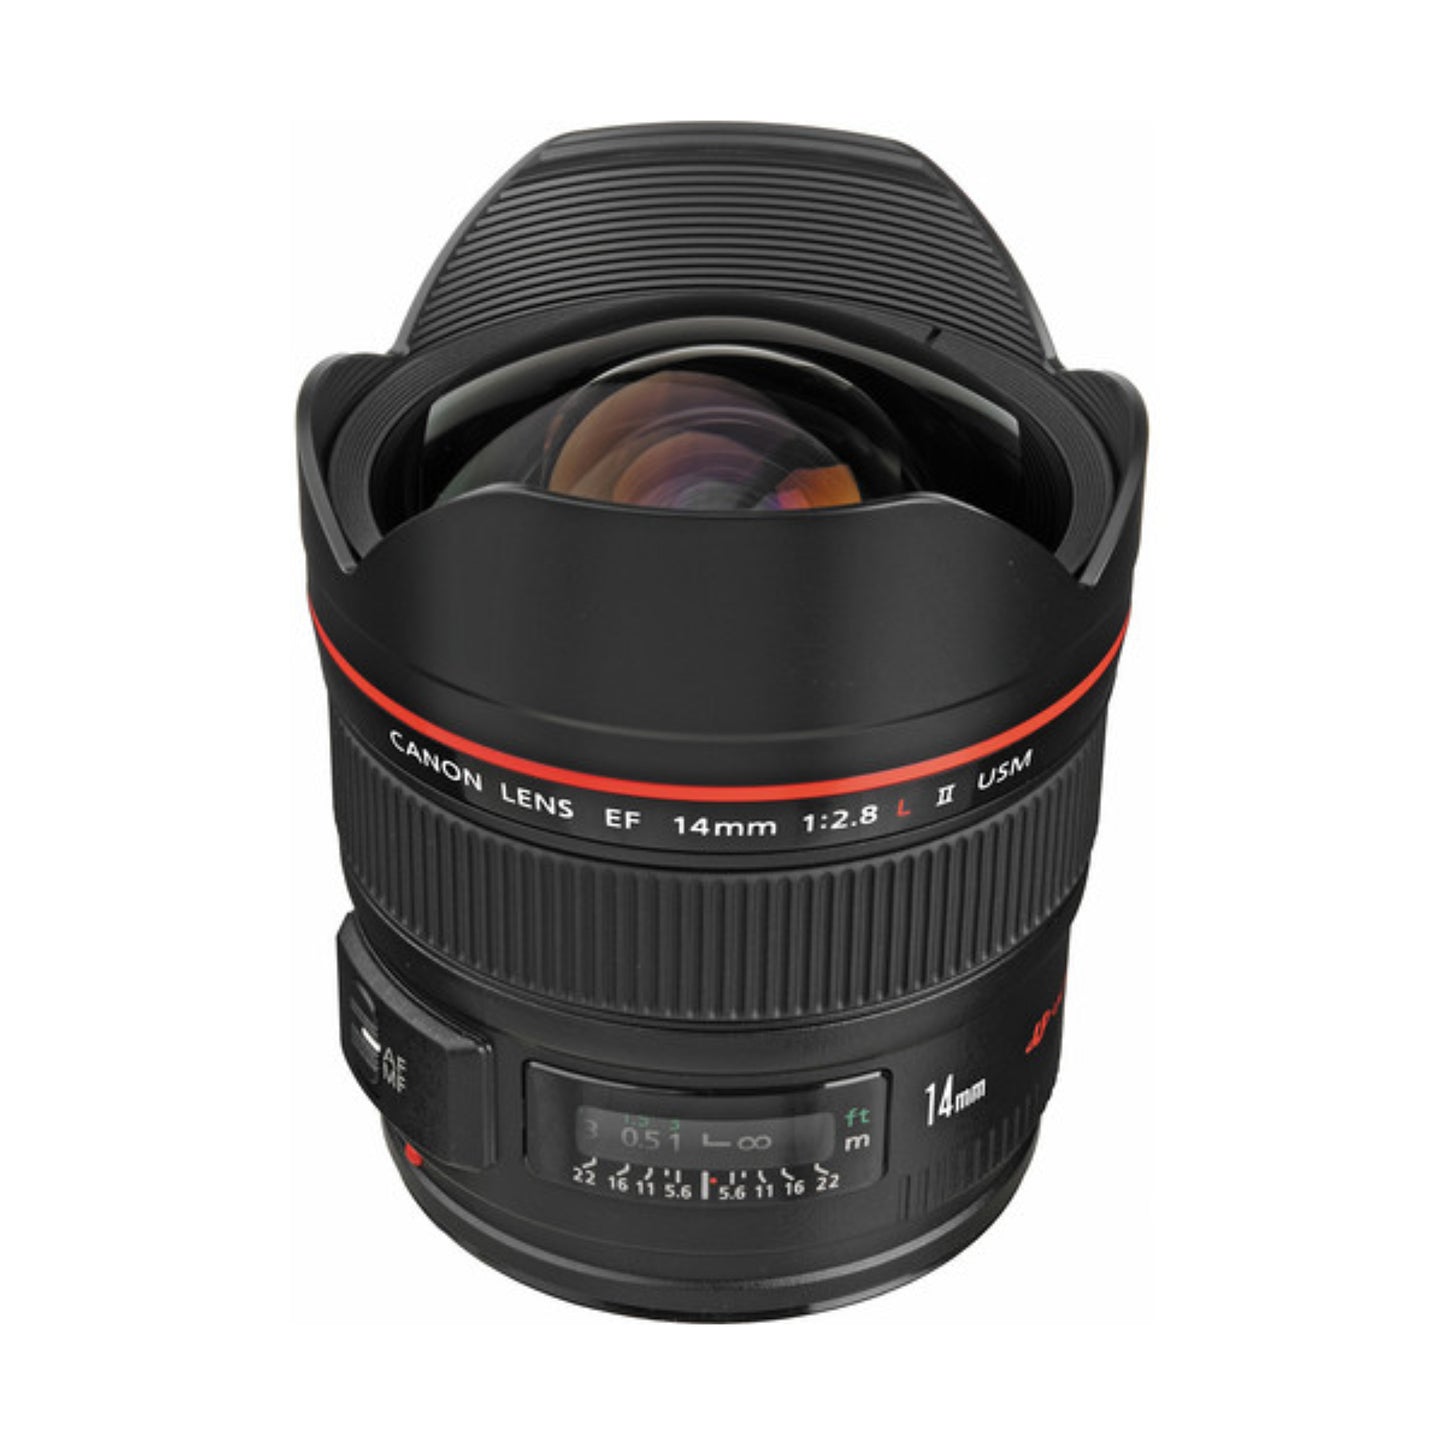 Canon 14mm f2.8 ef lens for hire at Topic Rentals